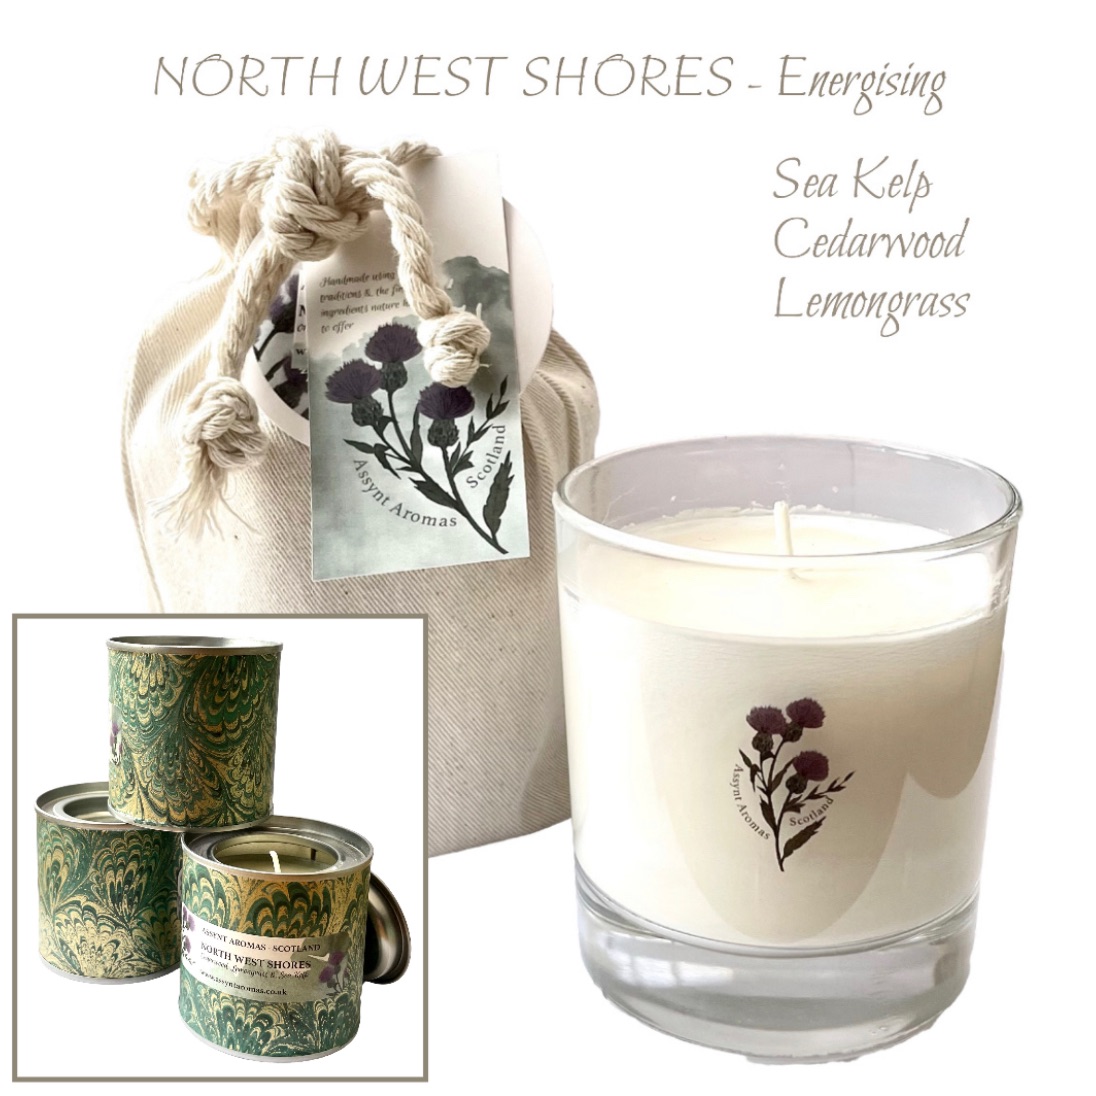 NORTH WEST SHORES - natural essence aromatherapy plant wax candle with esse